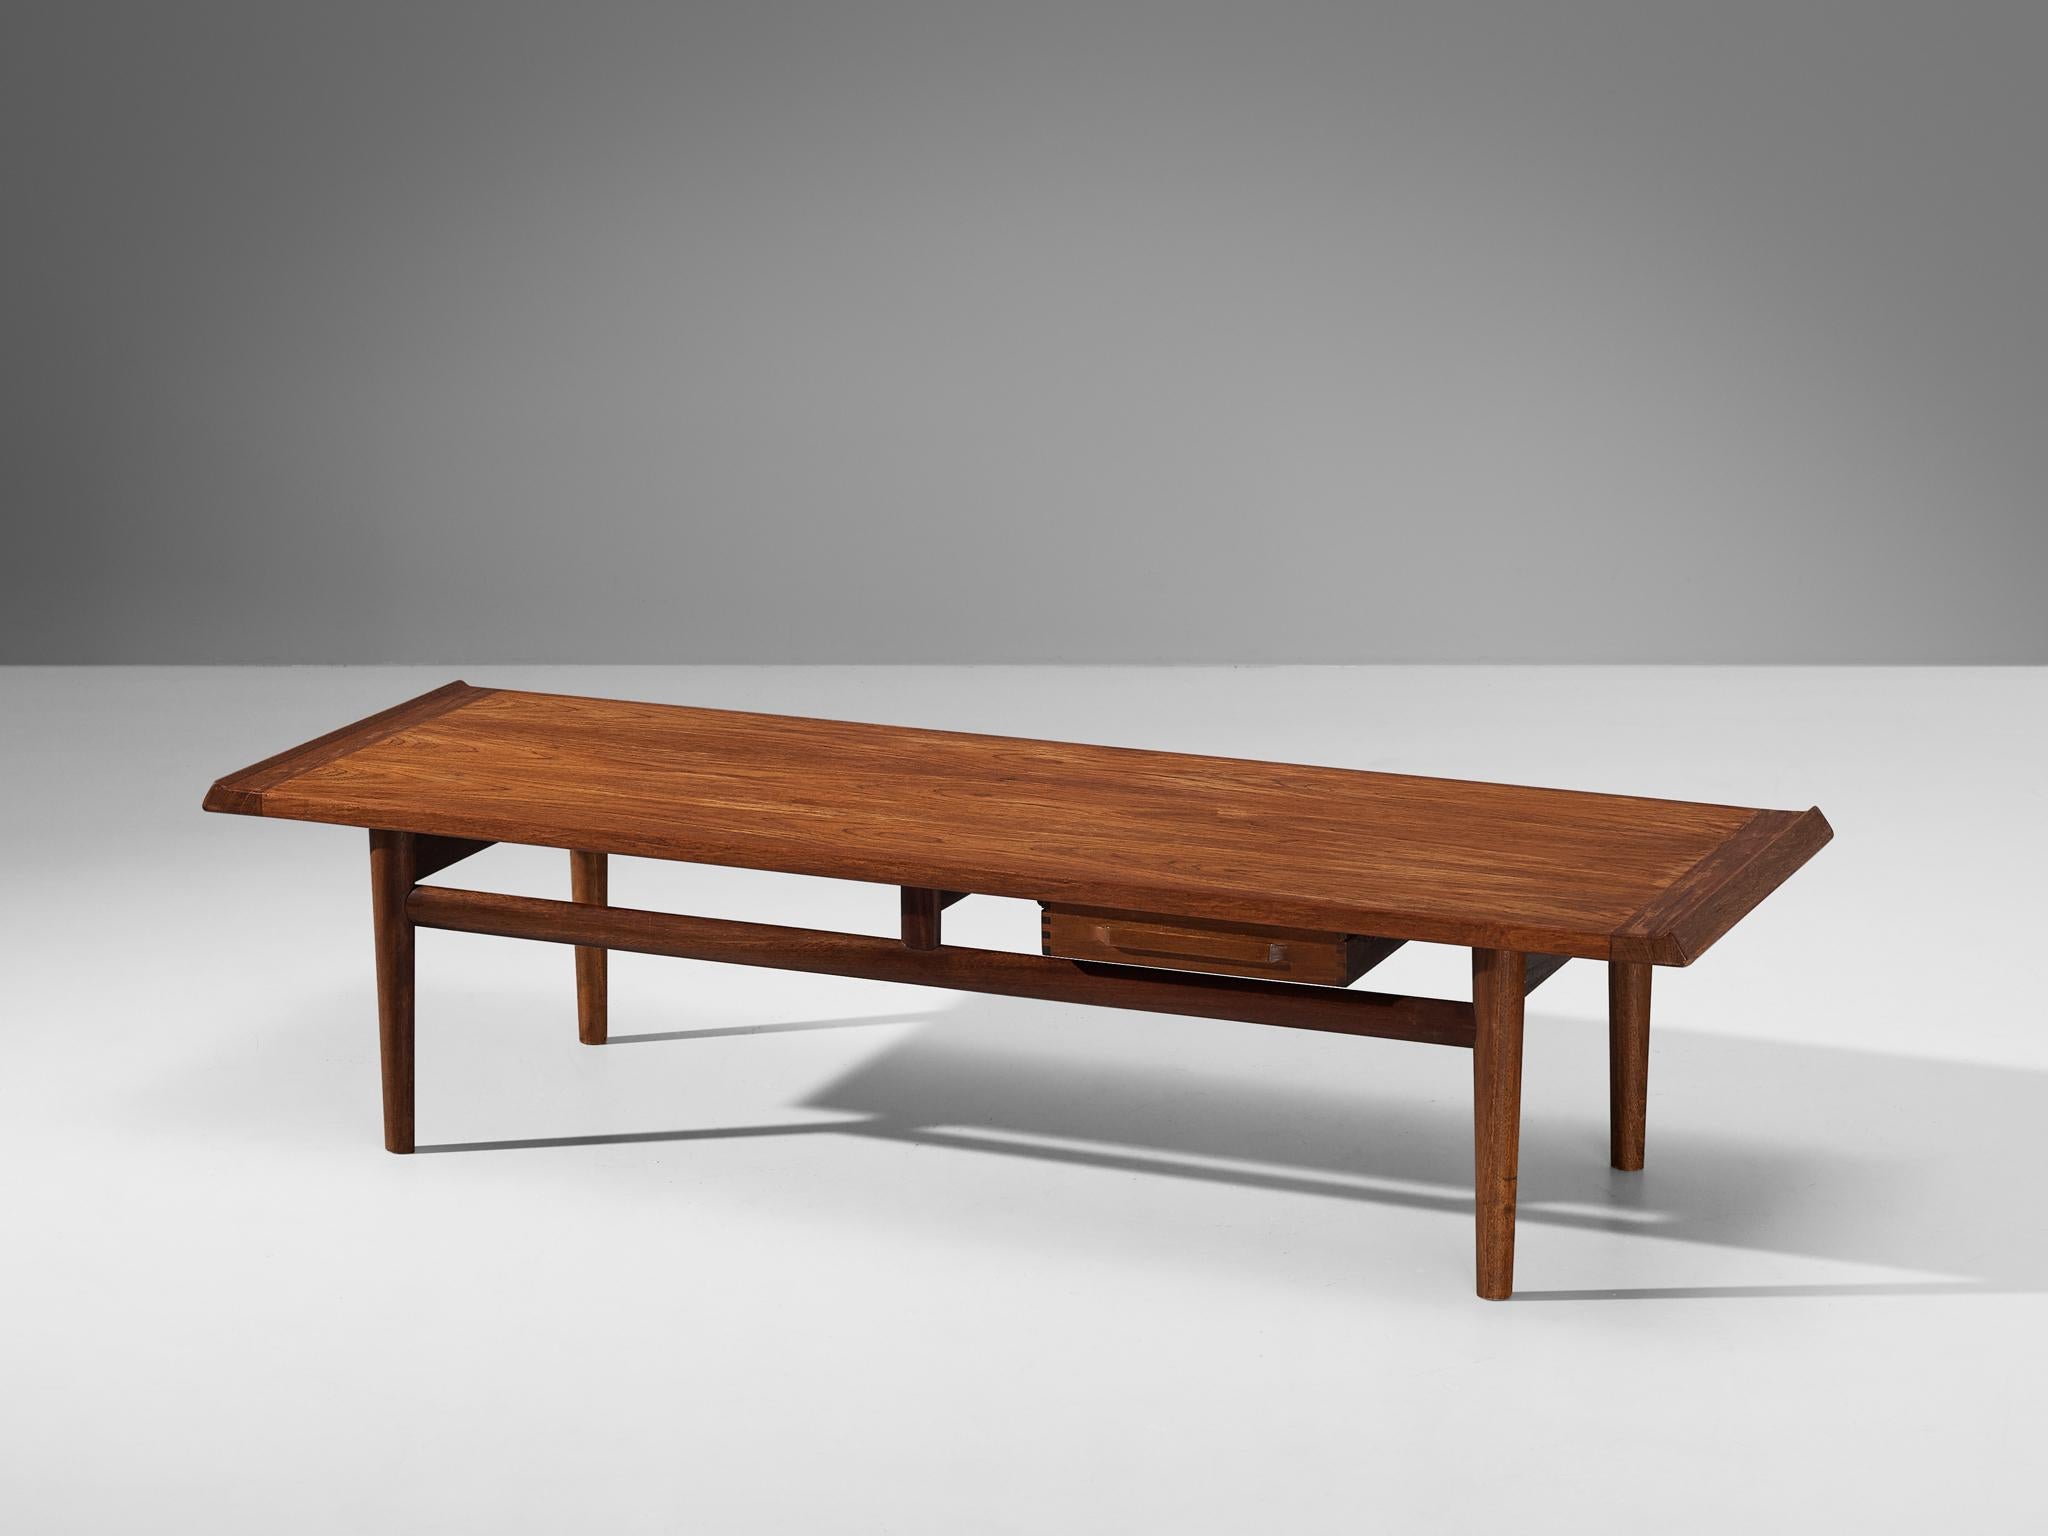 Torbjørn Afdal for Haug Snekkeri, coffee table, teak, Norway, 1964

A truly beautiful Norwegian coffee table executed in a warm and atmospheric teak. This table has an impressive size and is very sturdy and heavy. The quality of this piece is